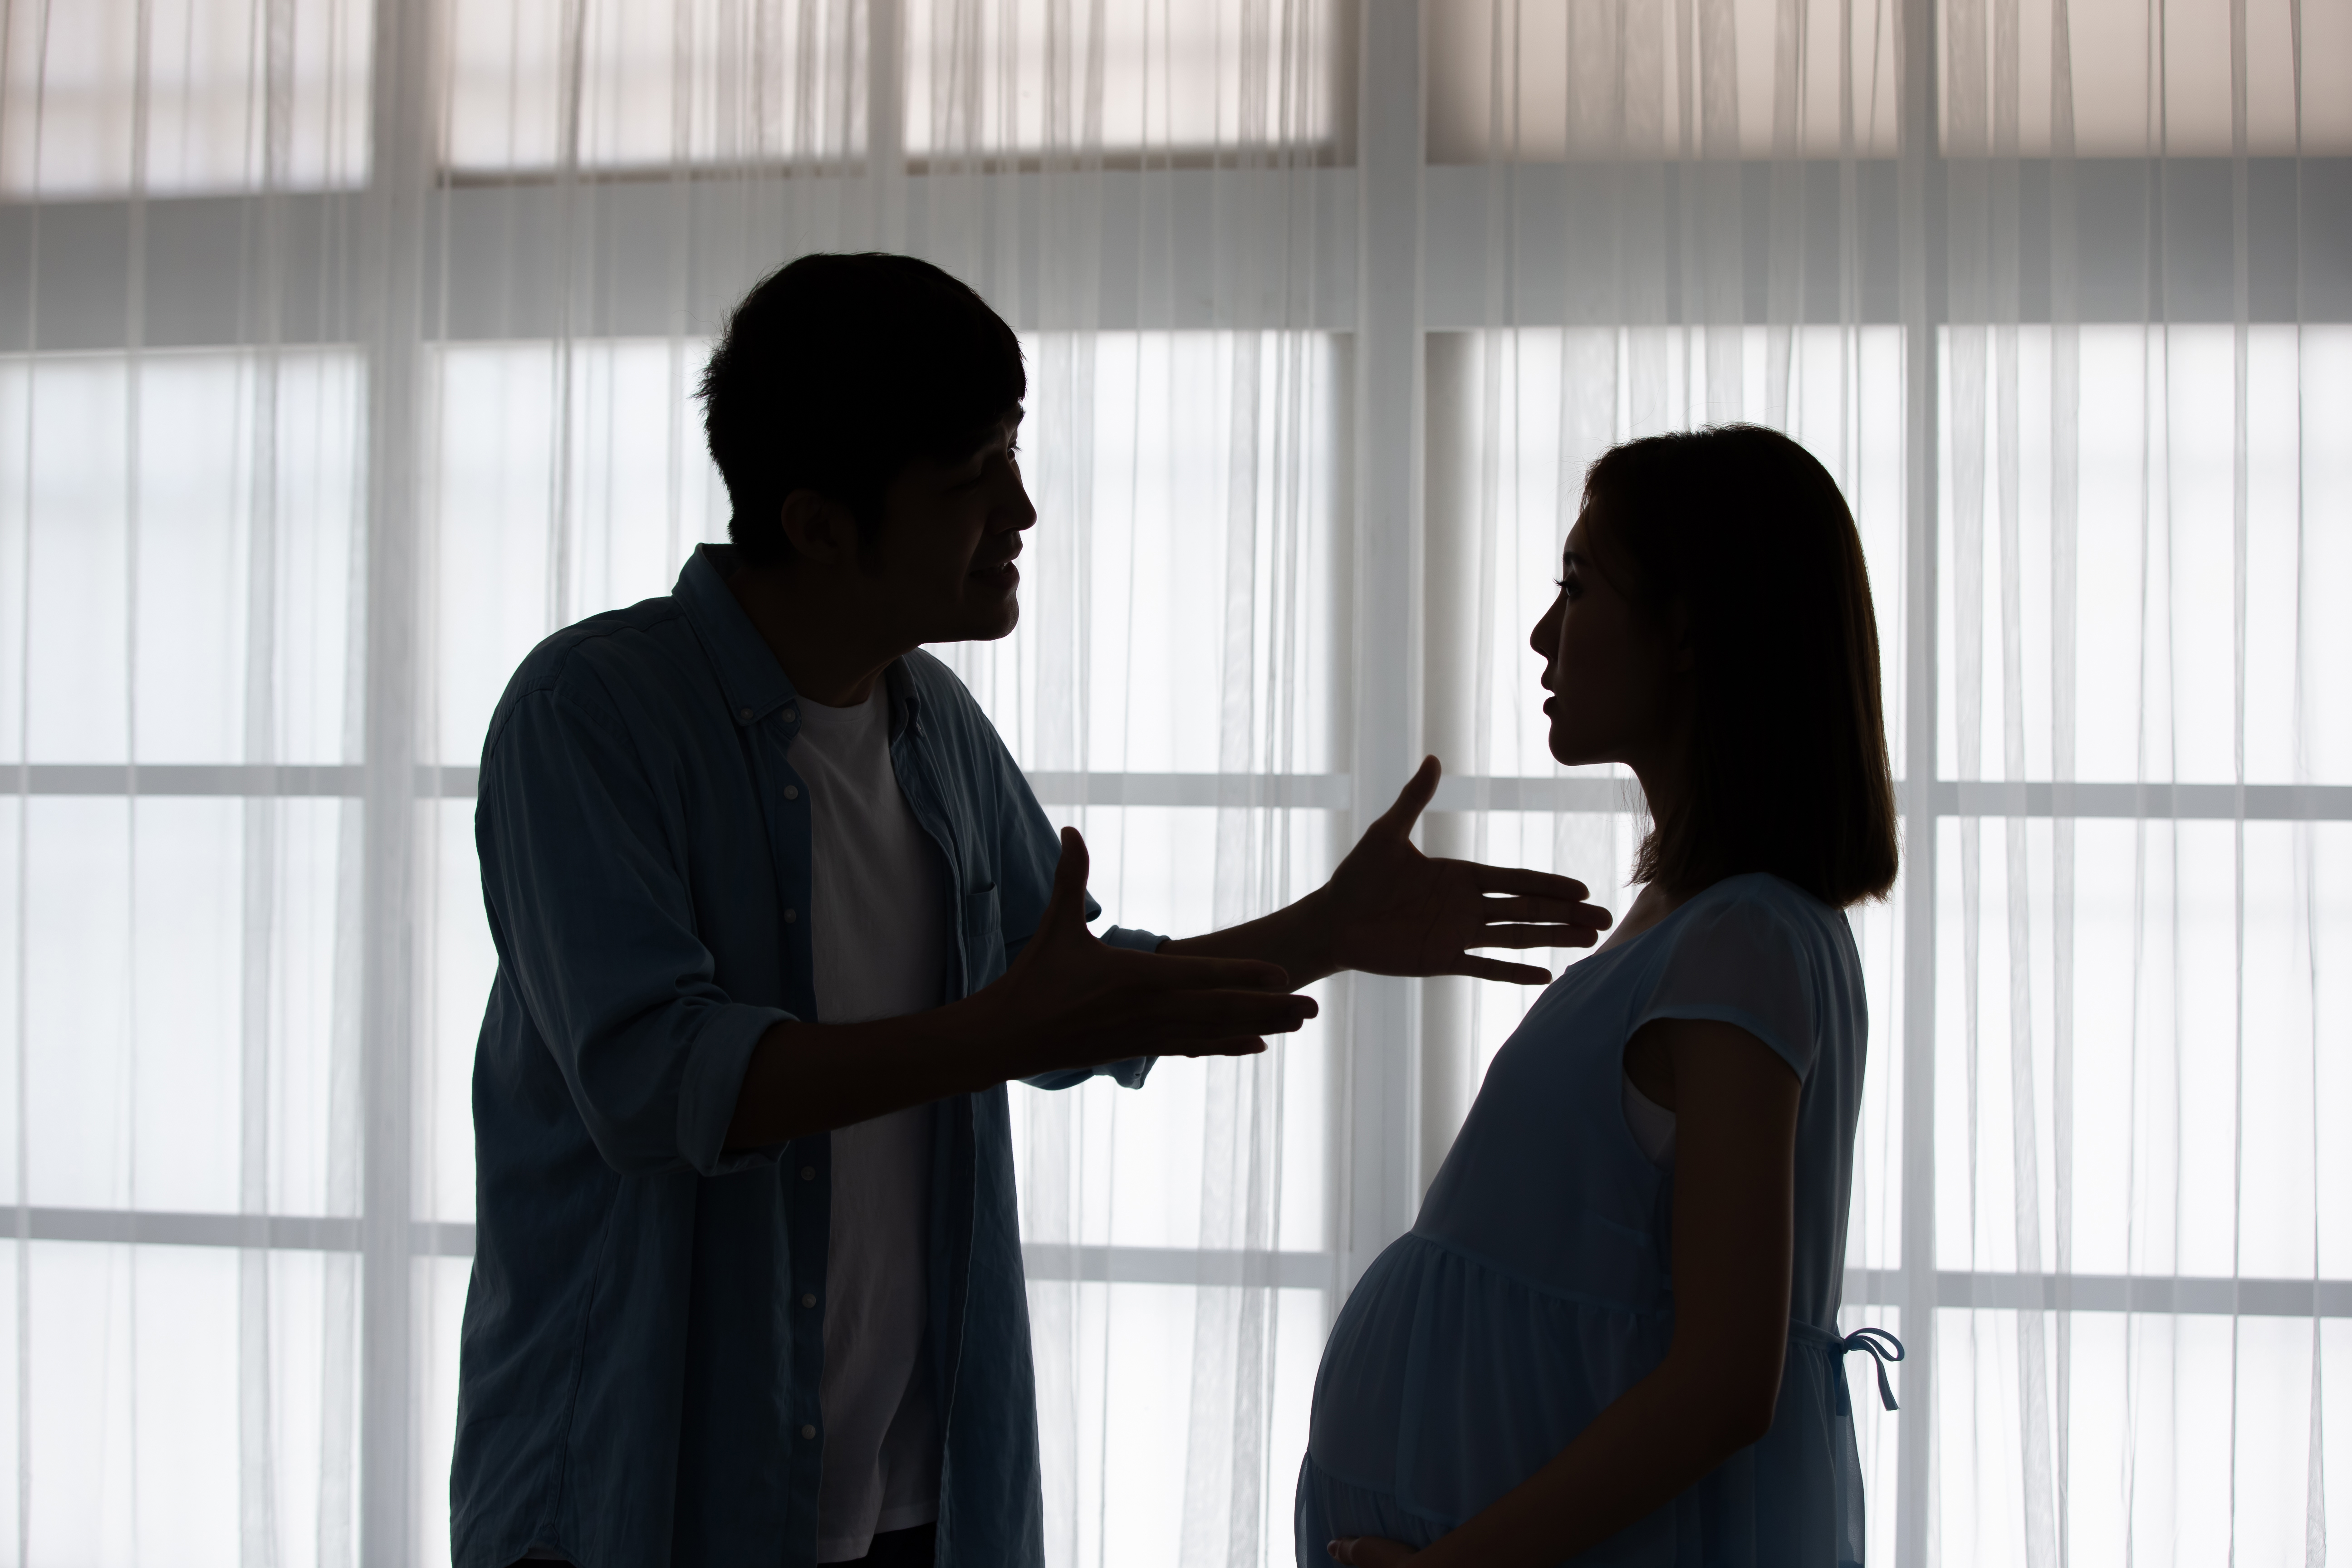 A man arguing with his pregnant wife | Source: Shutterstock